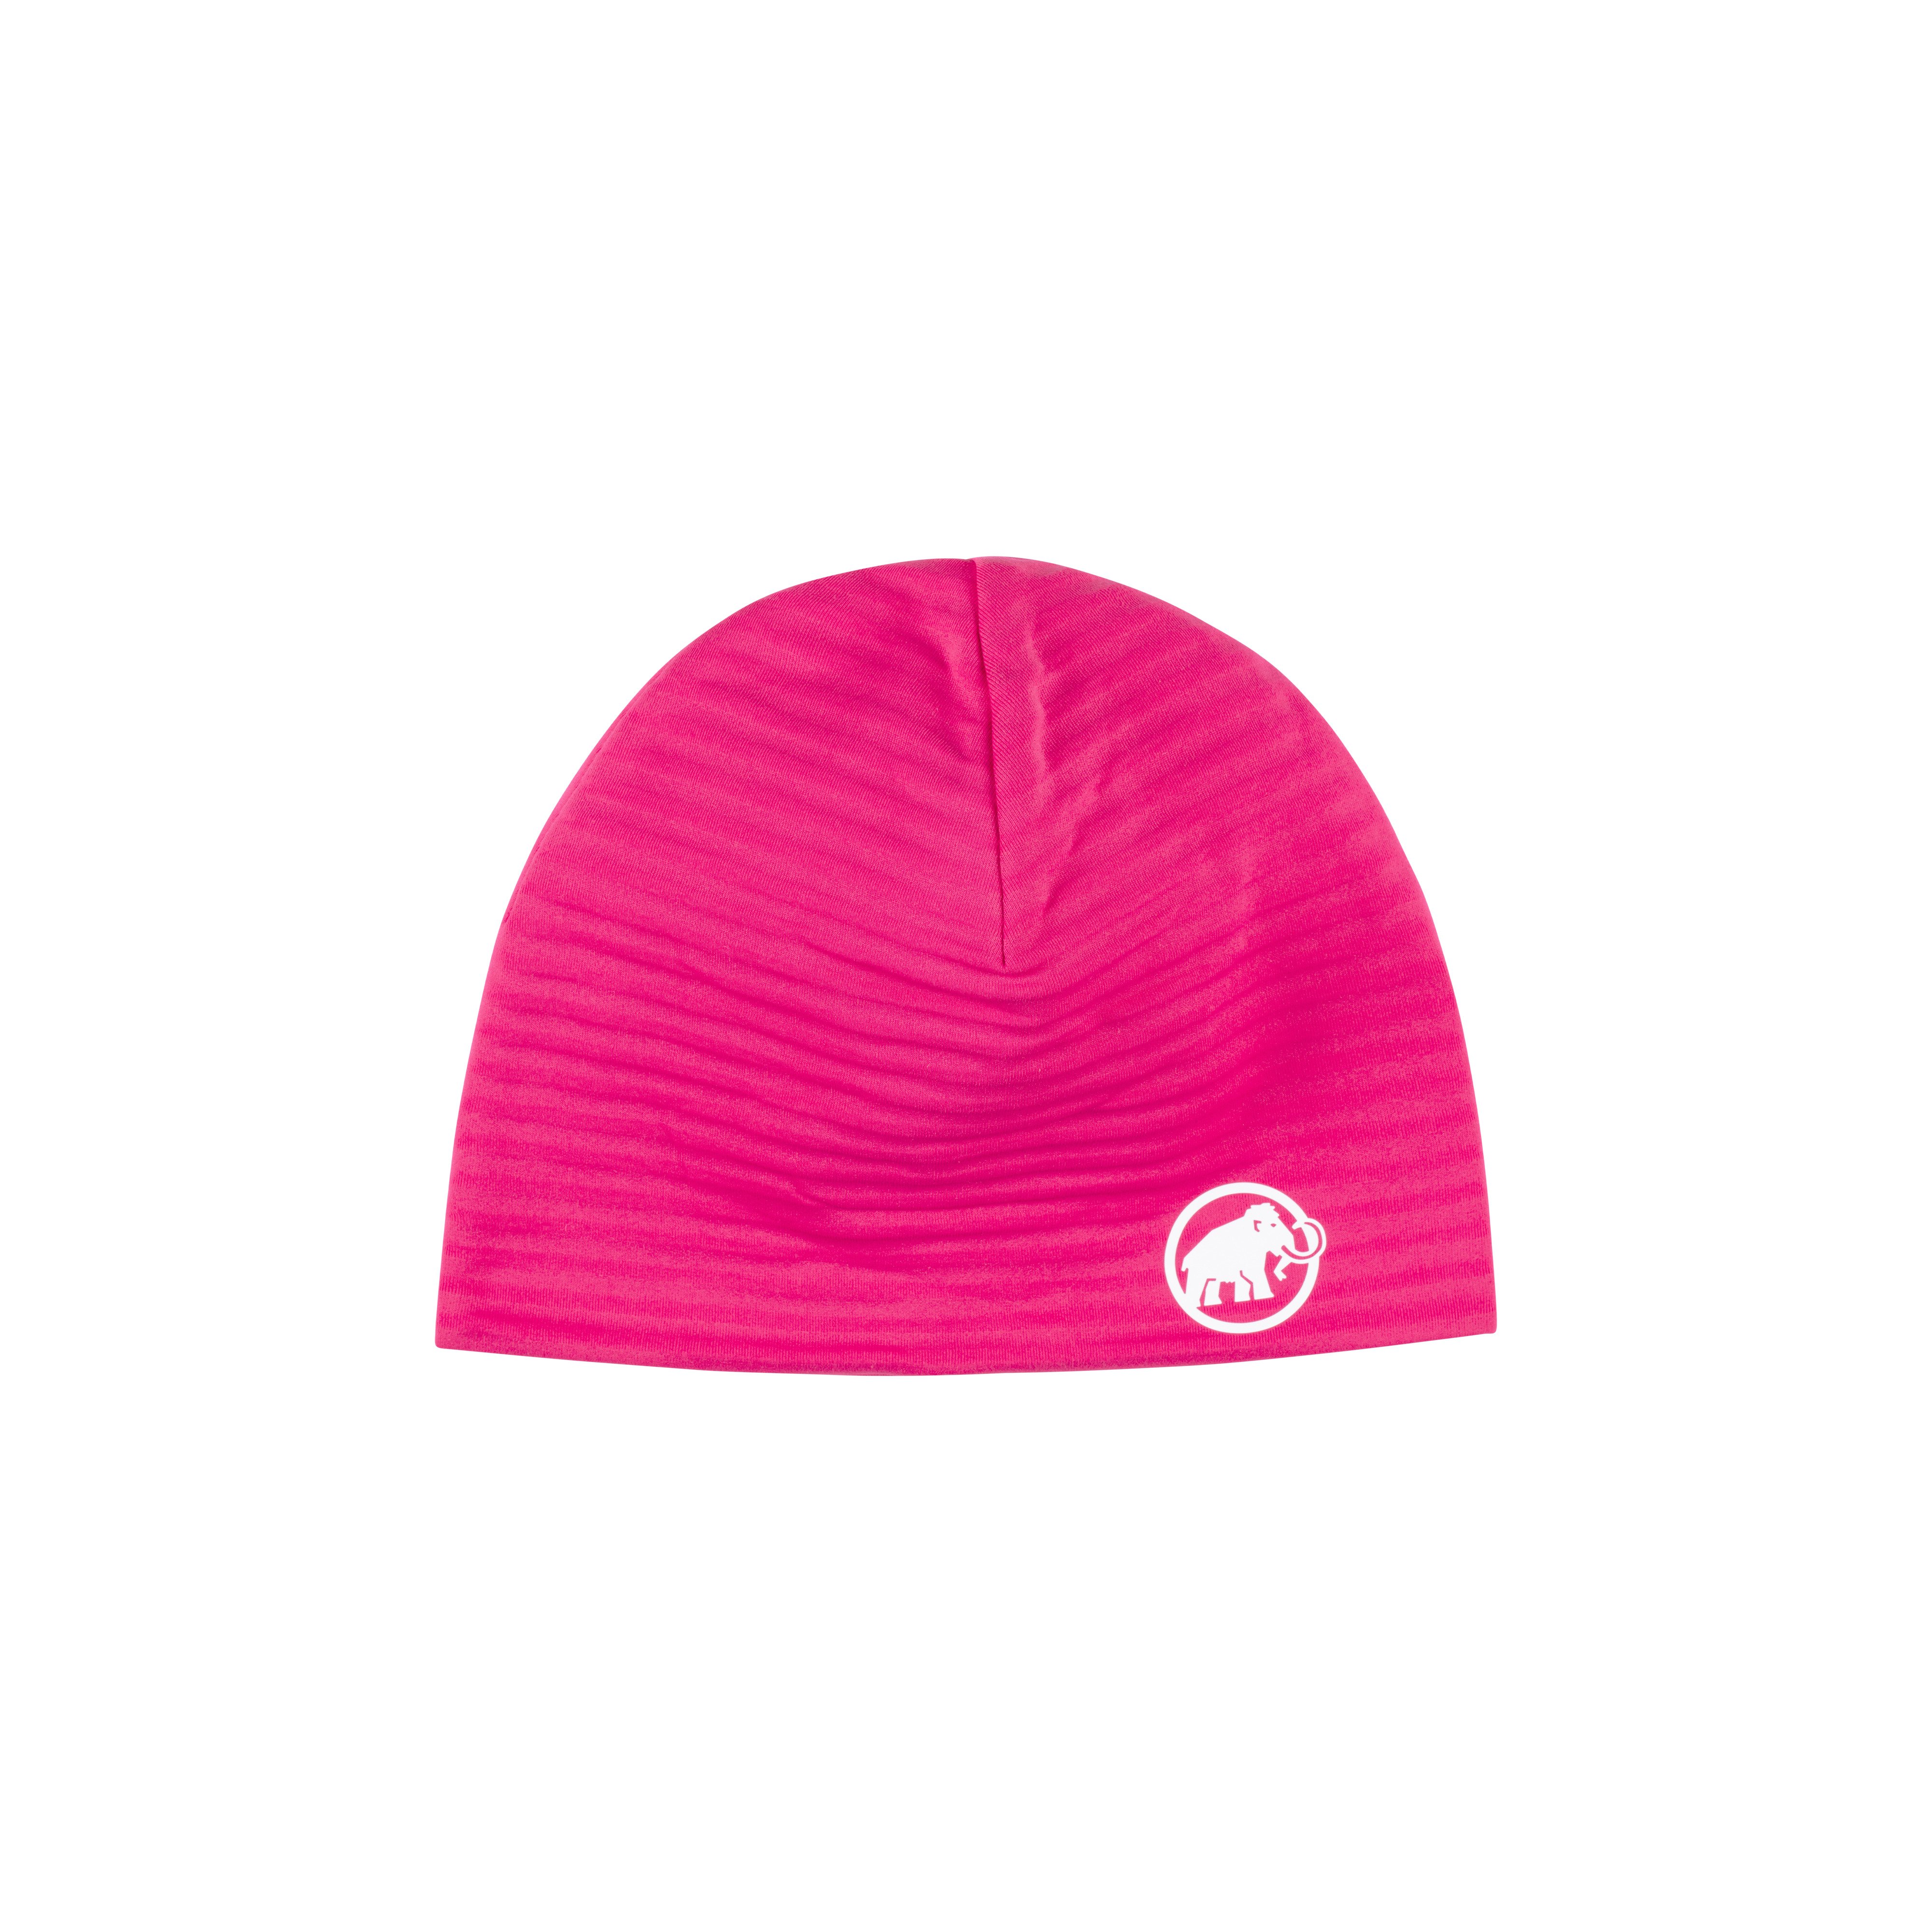 Taiss Light Beanie - pink, one size product image